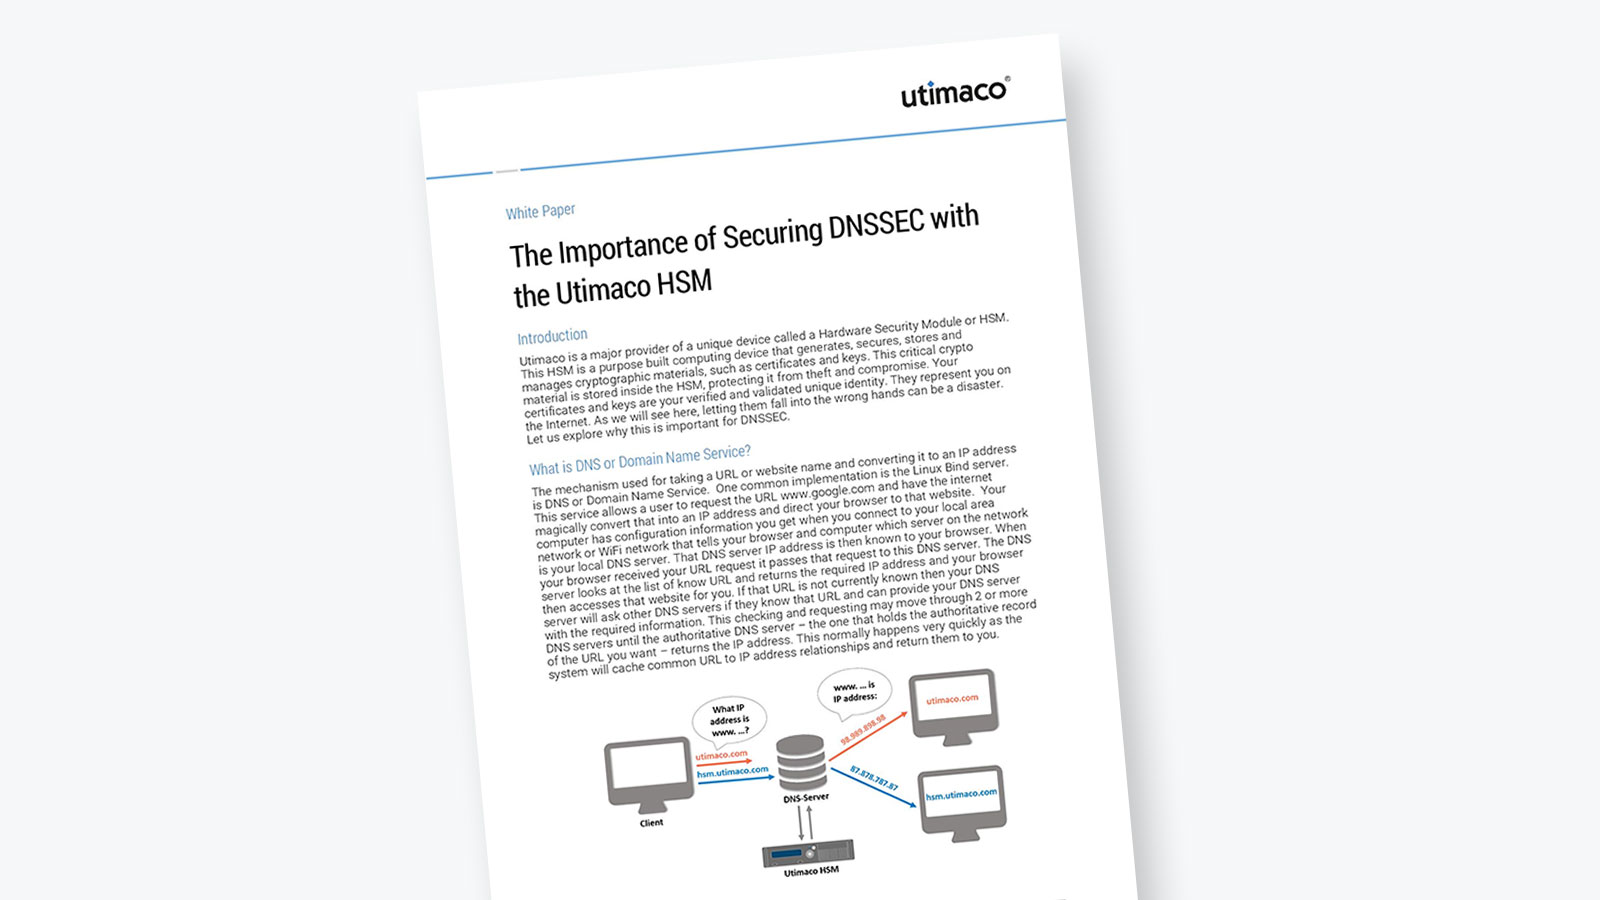 The Importance of Securing DNSSEC with the Utimaco HSM